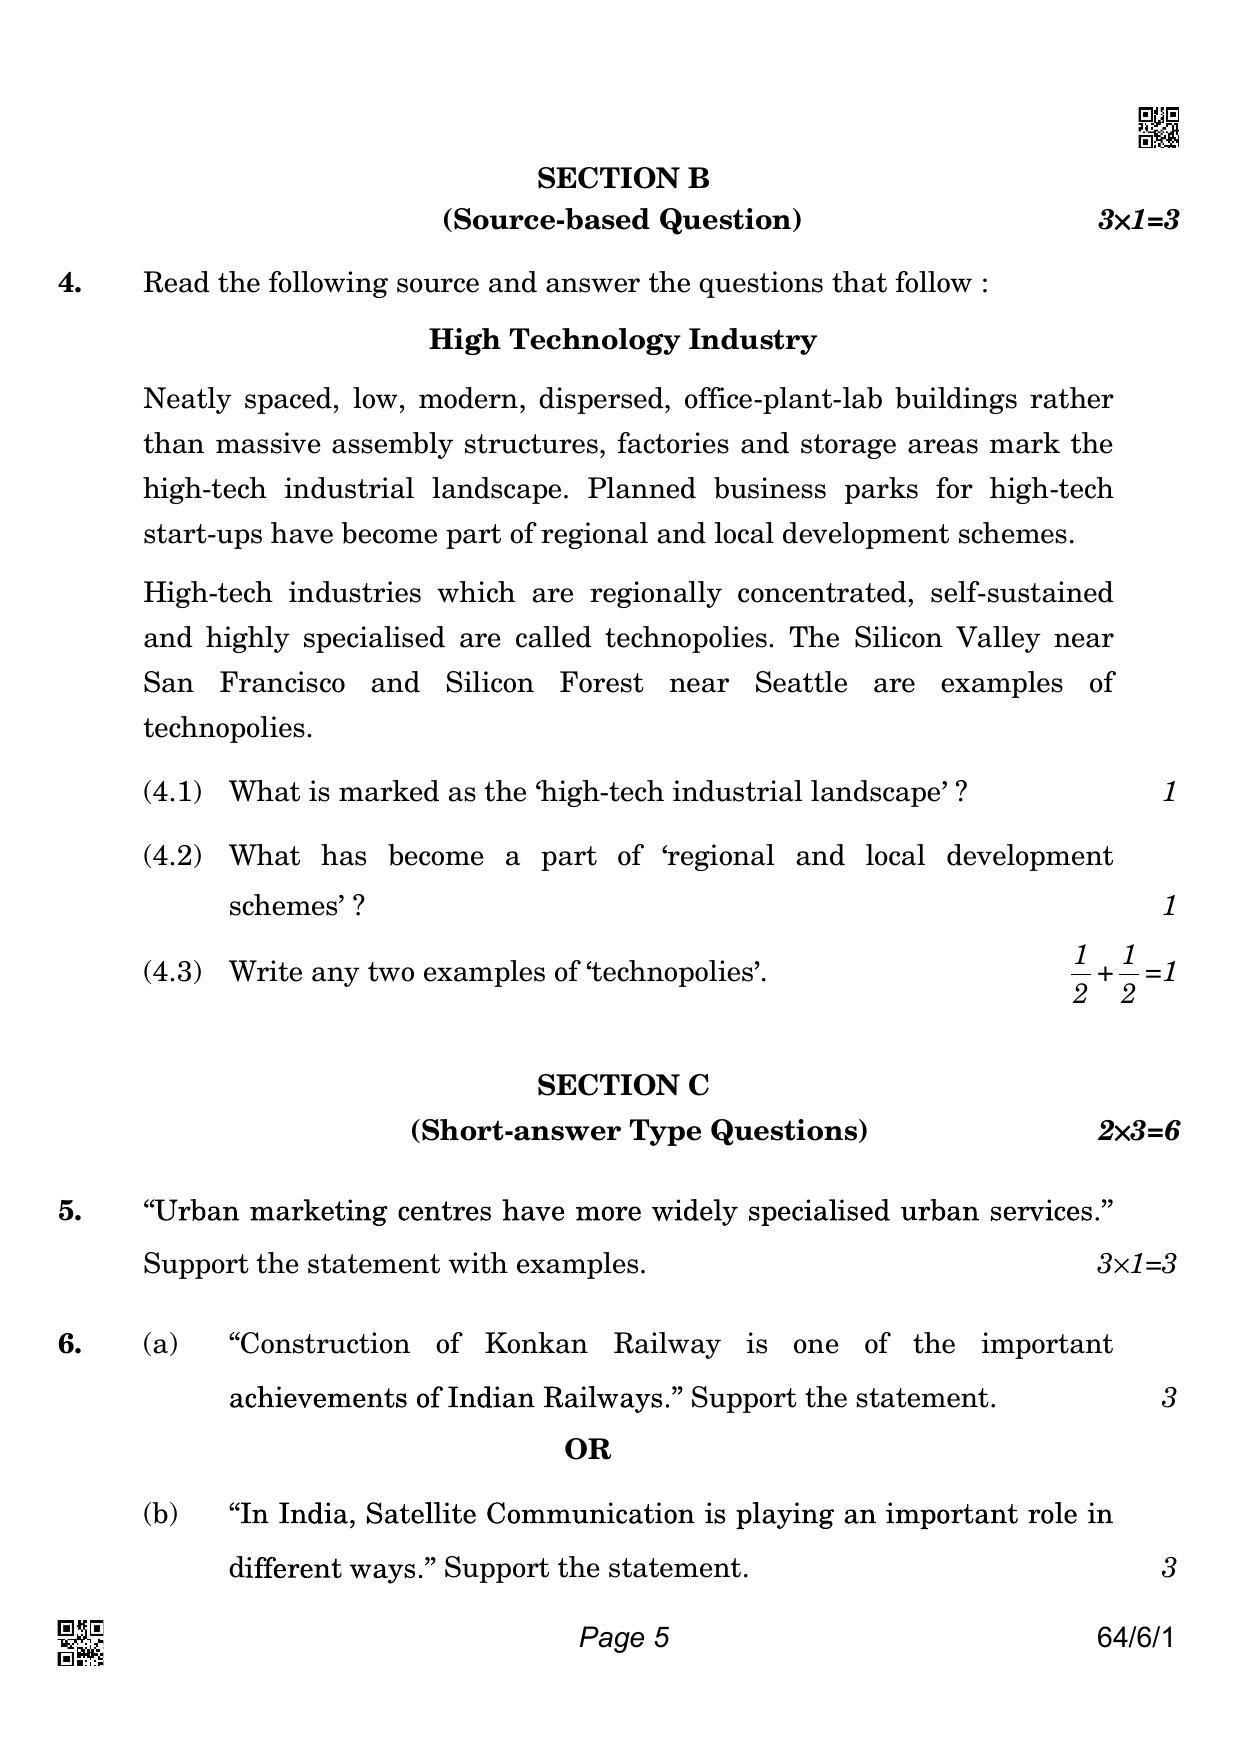 CBSE Class 12 64-6-1 GEOGRAPHY 2022 Compartment Question Paper - Page 5